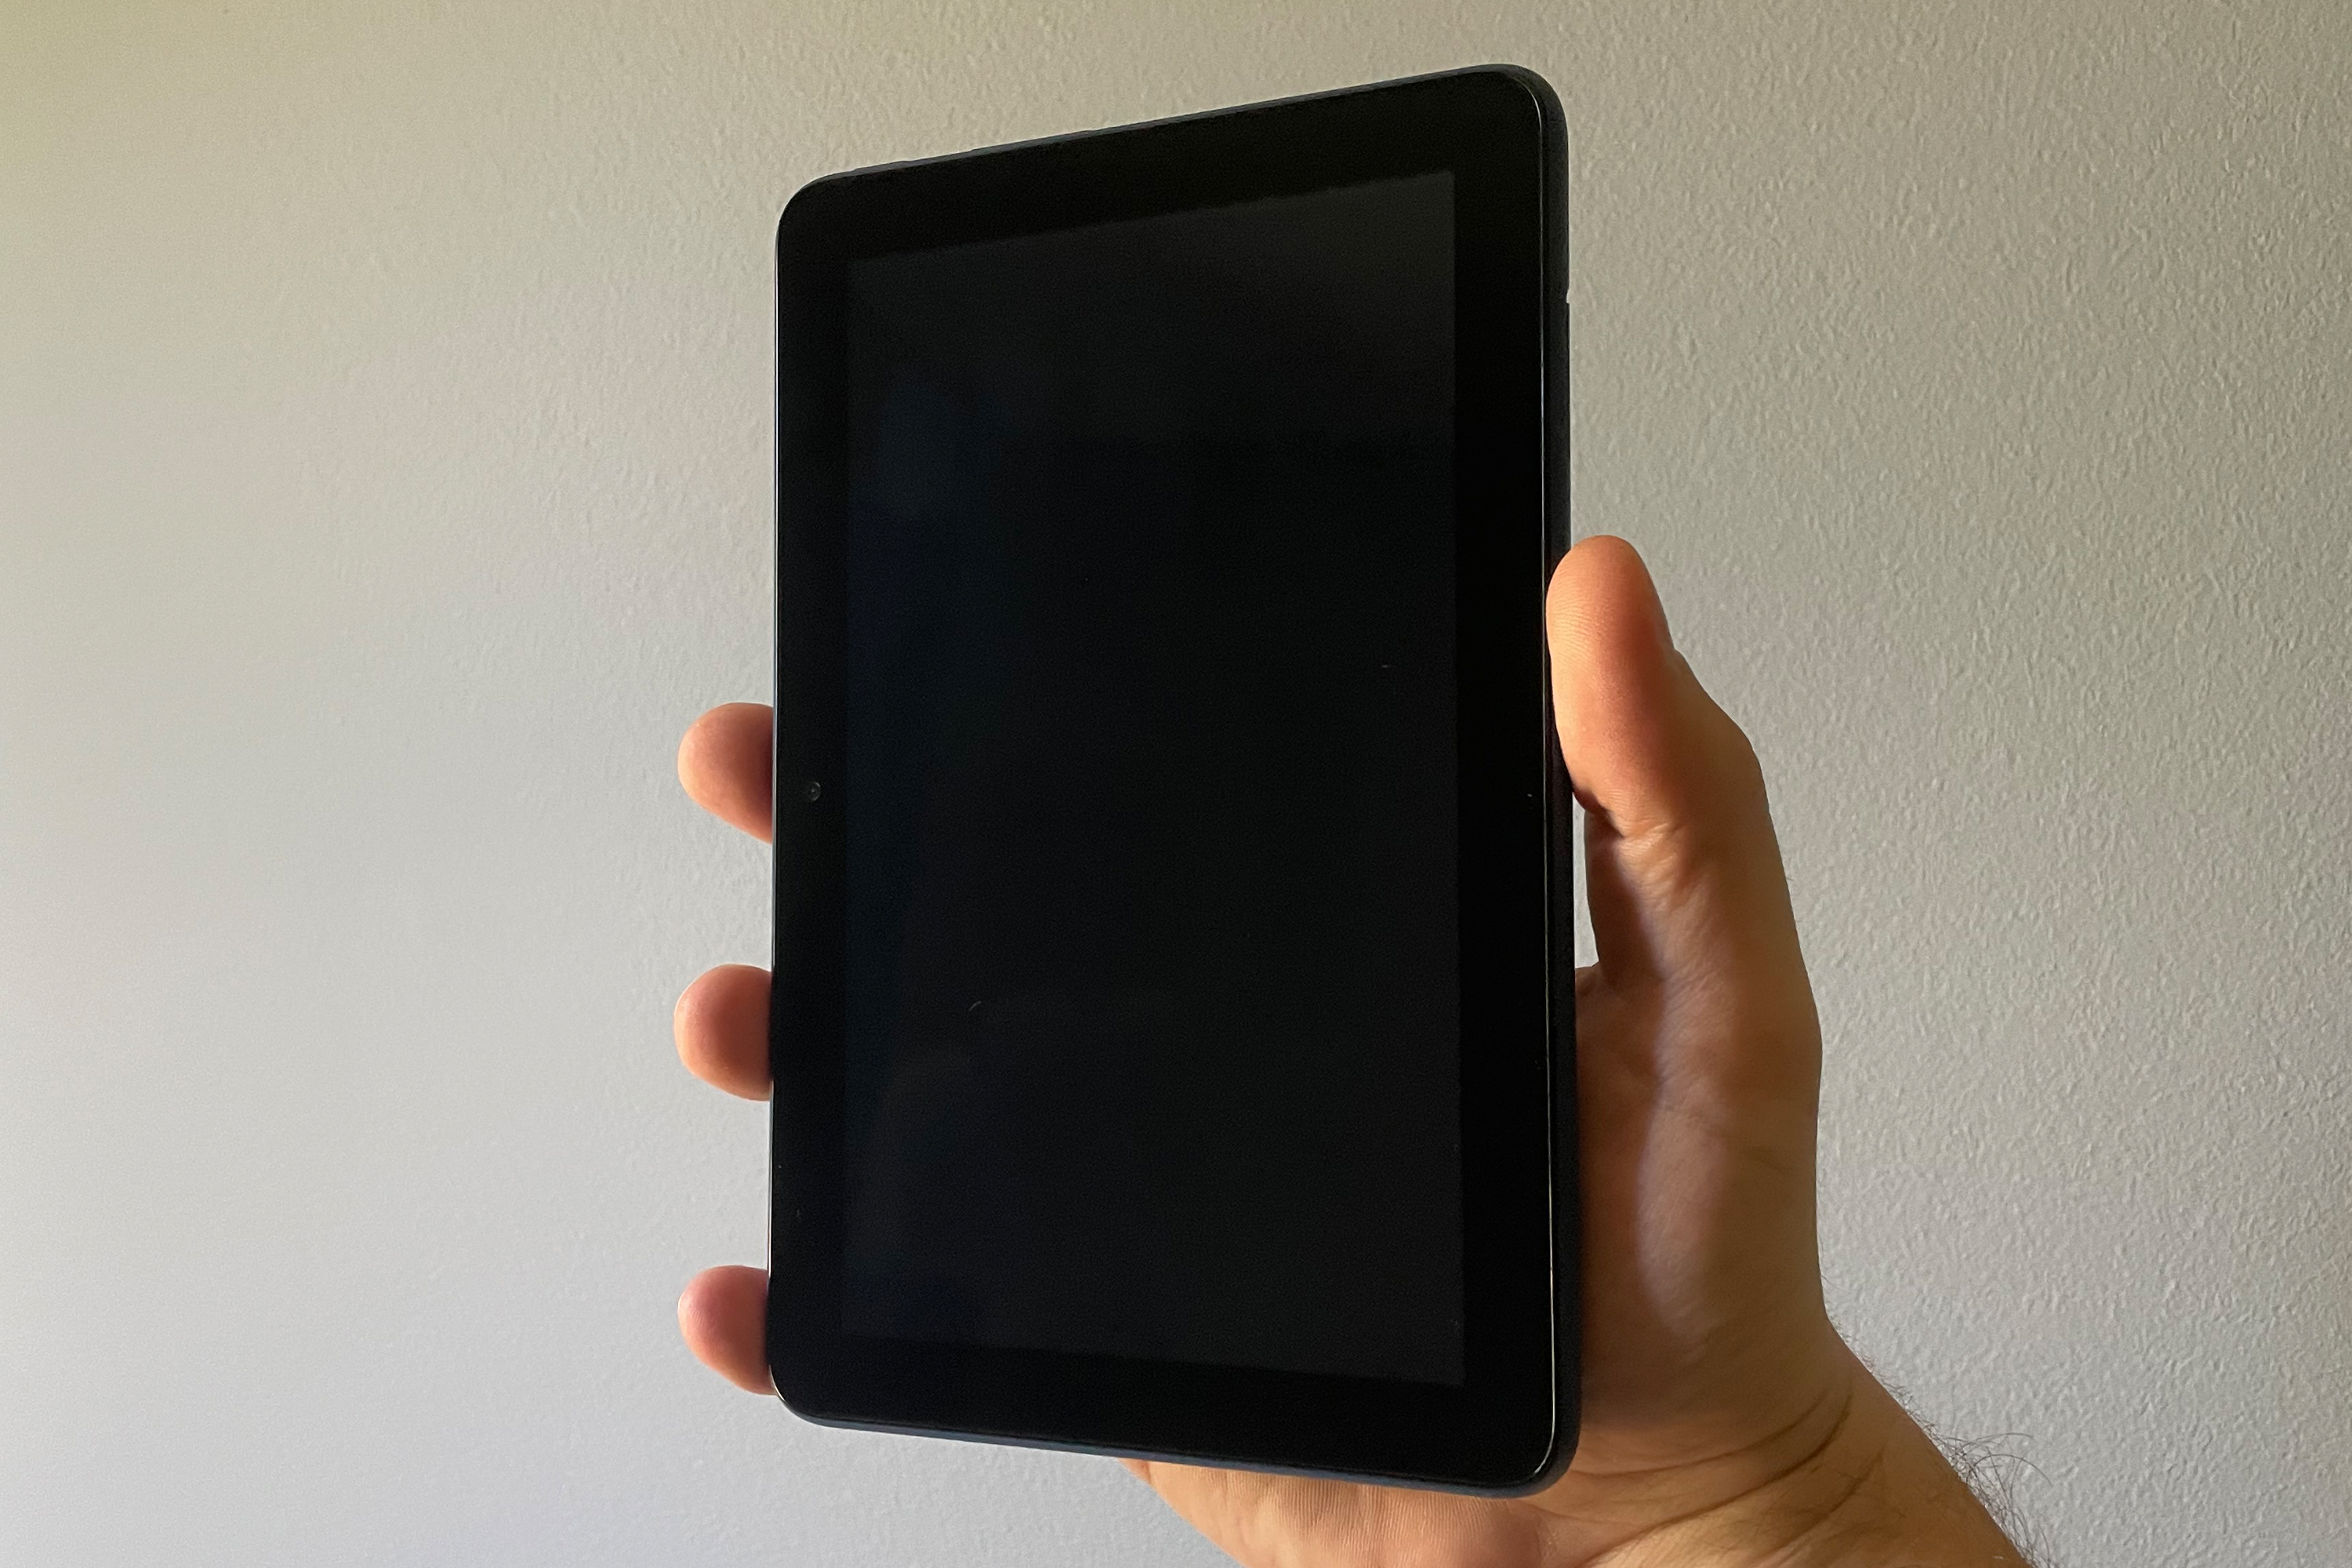 2022 Amazon Fire 7 held vertically showing its screen